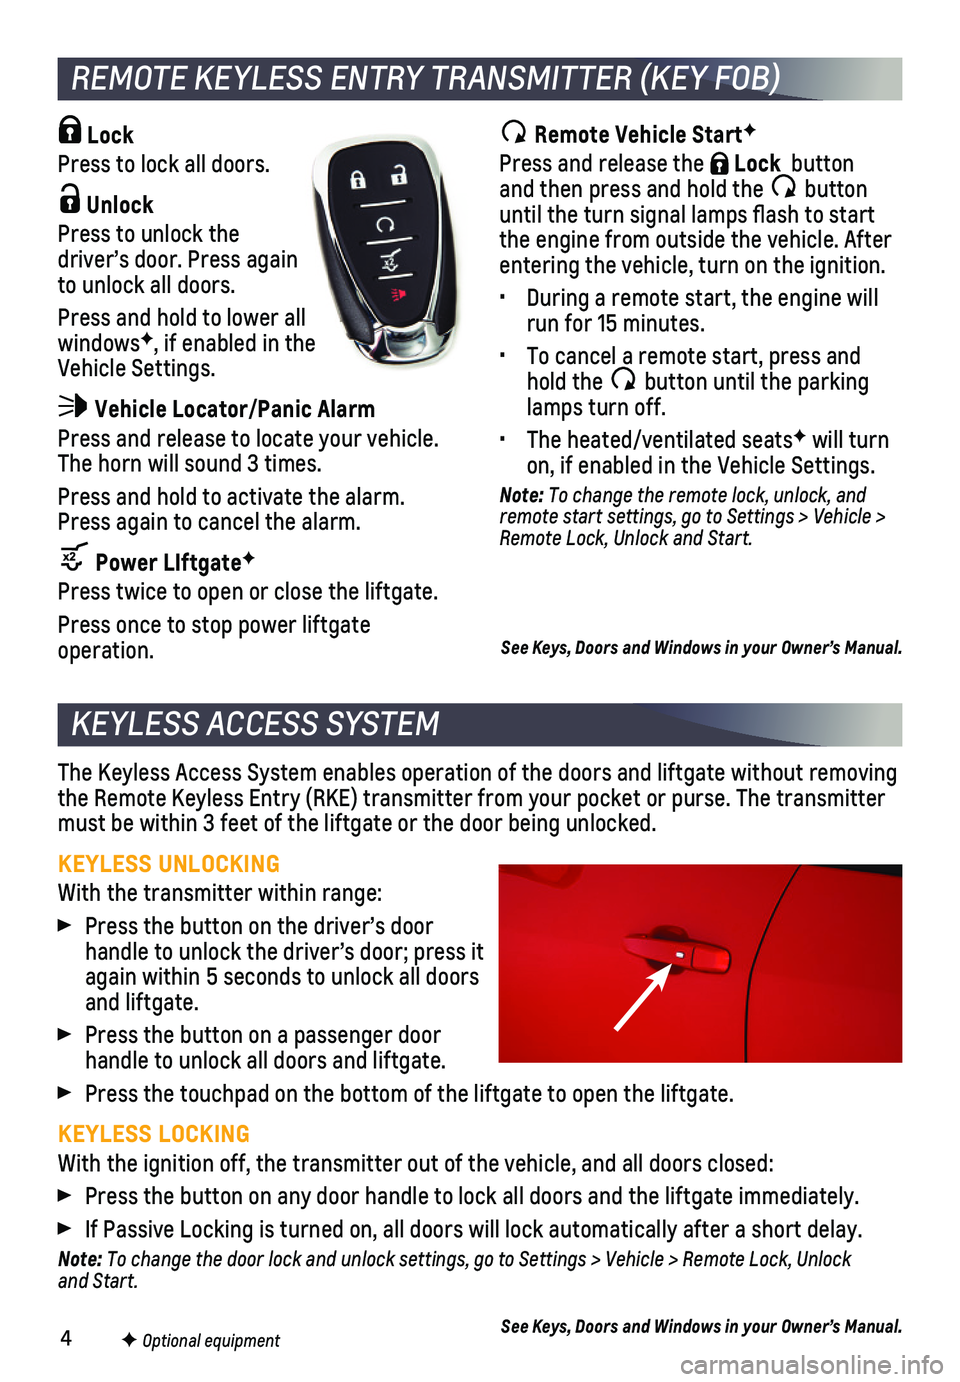 CHEVROLET BLAZER 2020  Get To Know Guide 4
KEYLESS ACCESS SYSTEM
The Keyless Access System enables operation of the doors and liftgate wi\
thout removing the Remote Keyless Entry (RKE) transmitter from your pocket or purse. \
The transmitter